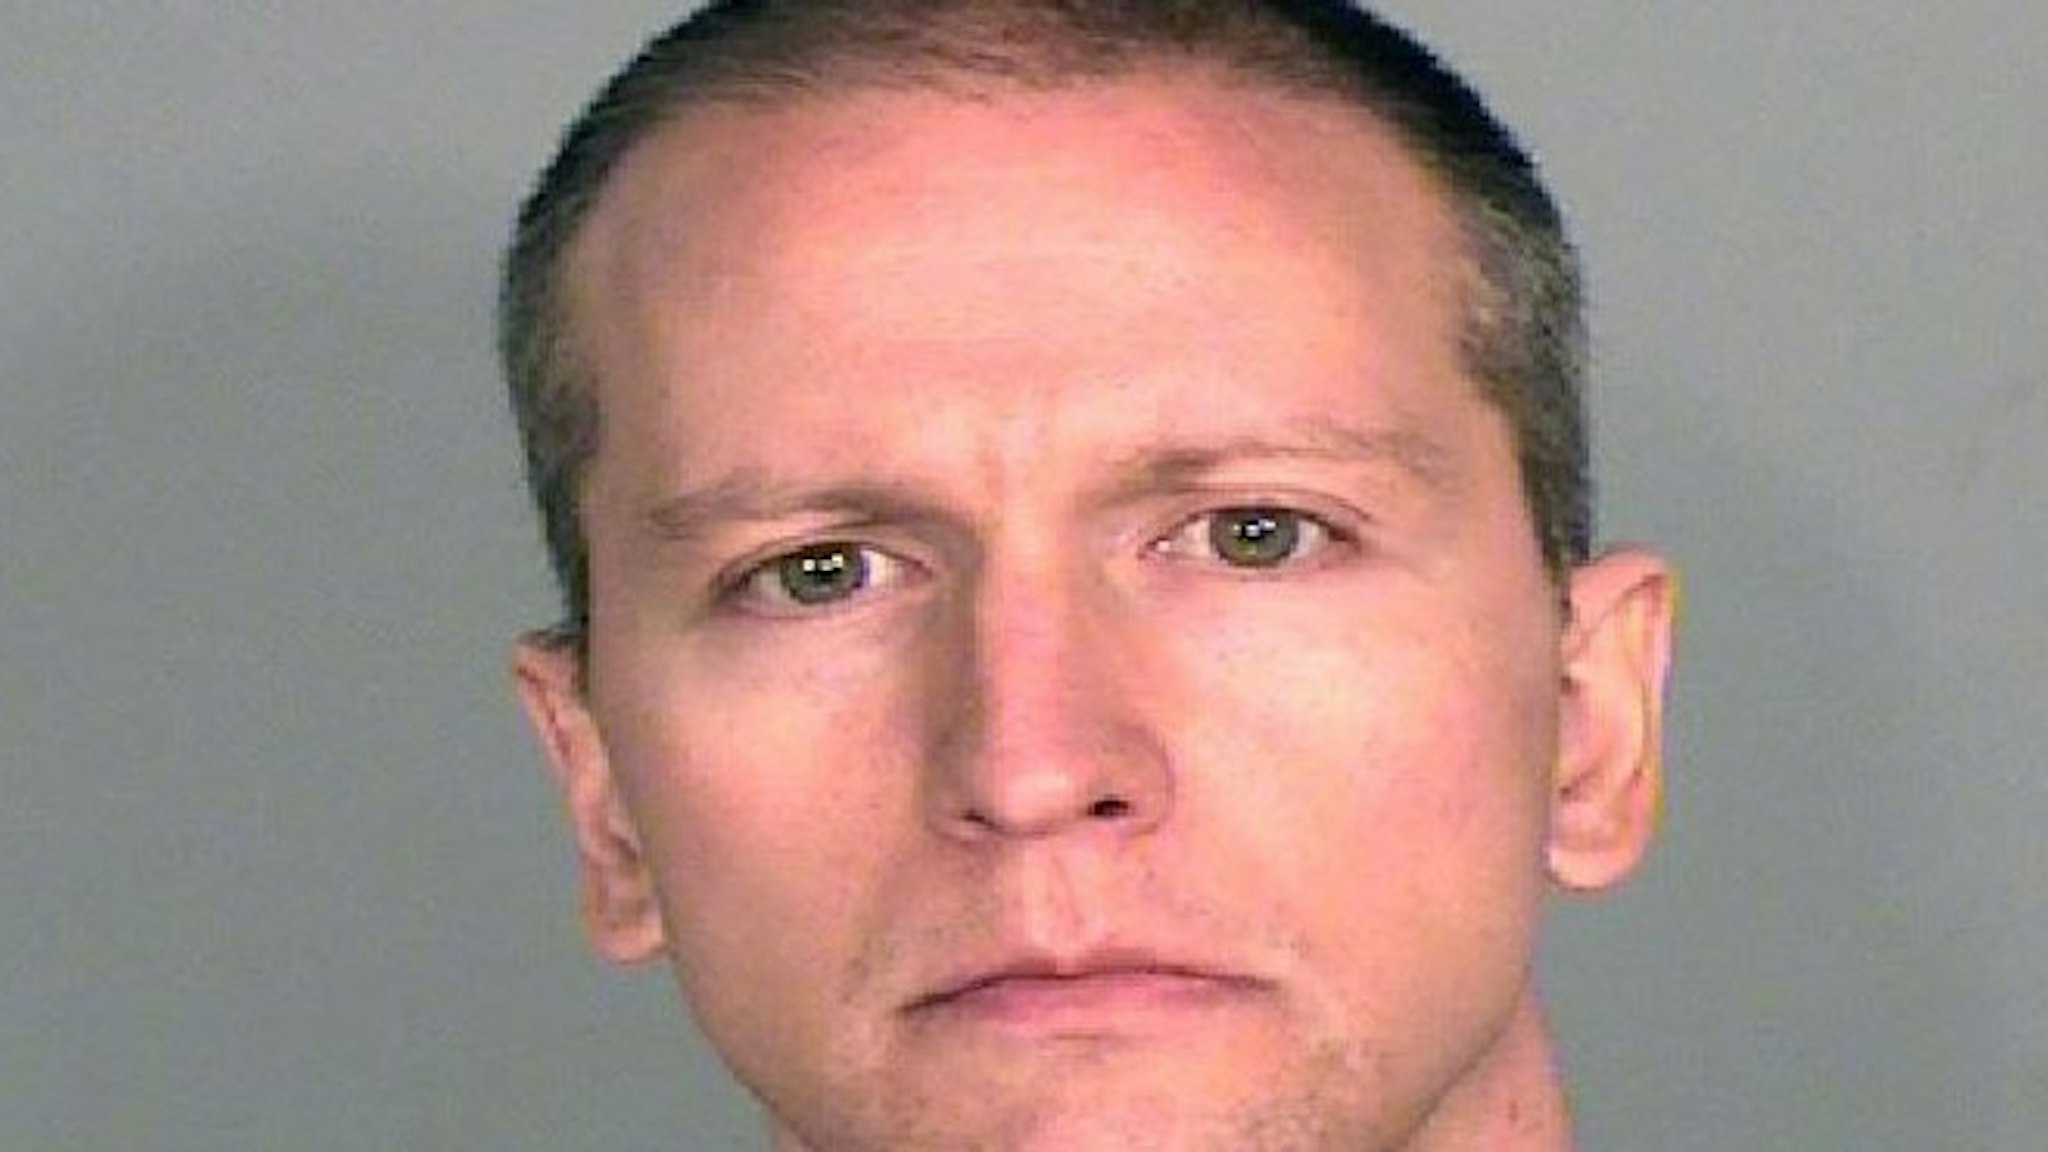 UNSPECIFIED LOCATION AND DATE: (EDITORS NOTE: Best quality available) In this handout provided by Ramsey County Sheriff's Office, former Minneapolis police officer Derek Chauvin poses for a mugshot after being charged in the death of George Floyd . Bail for Chauvin, who is charged with third-degree murder and manslaughter, is set at $500,000. The death sparked riots and protests in cities throughout the country after Floyd, a black man, was killed in police custody in Minneapolis on May 25. (Photo by